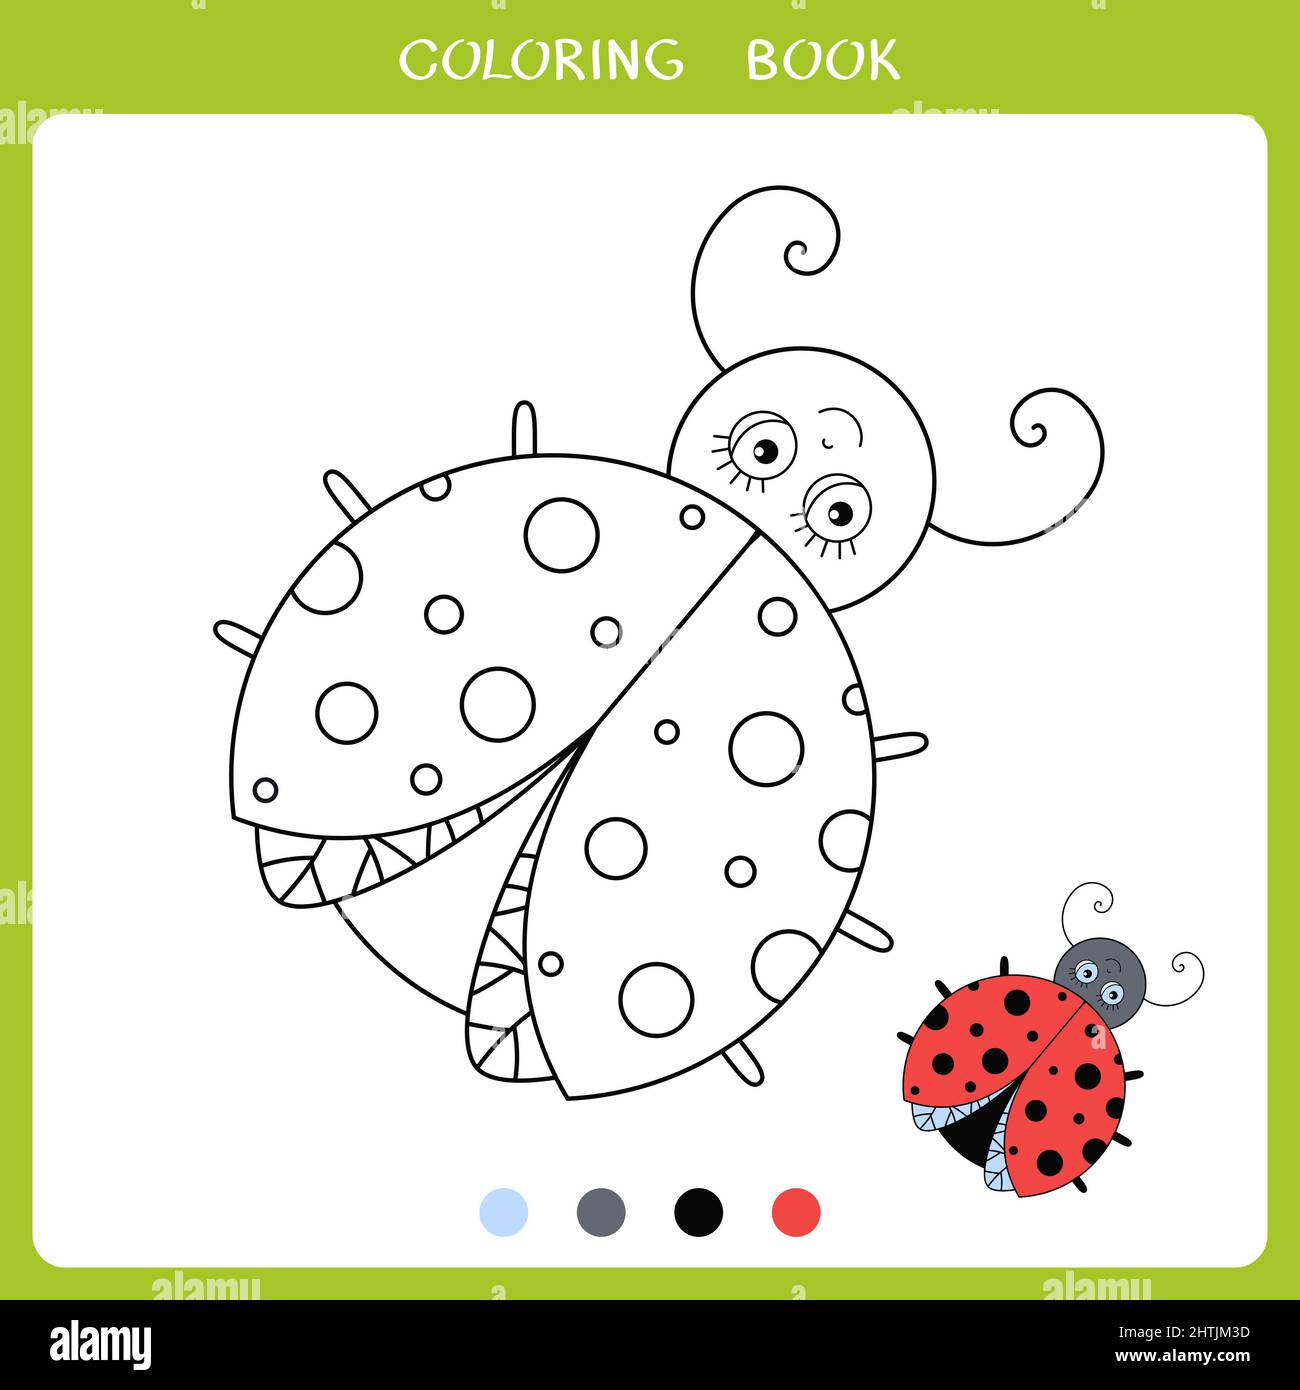 6300 Collections Cute Ladybug Coloring Pages  Latest Free